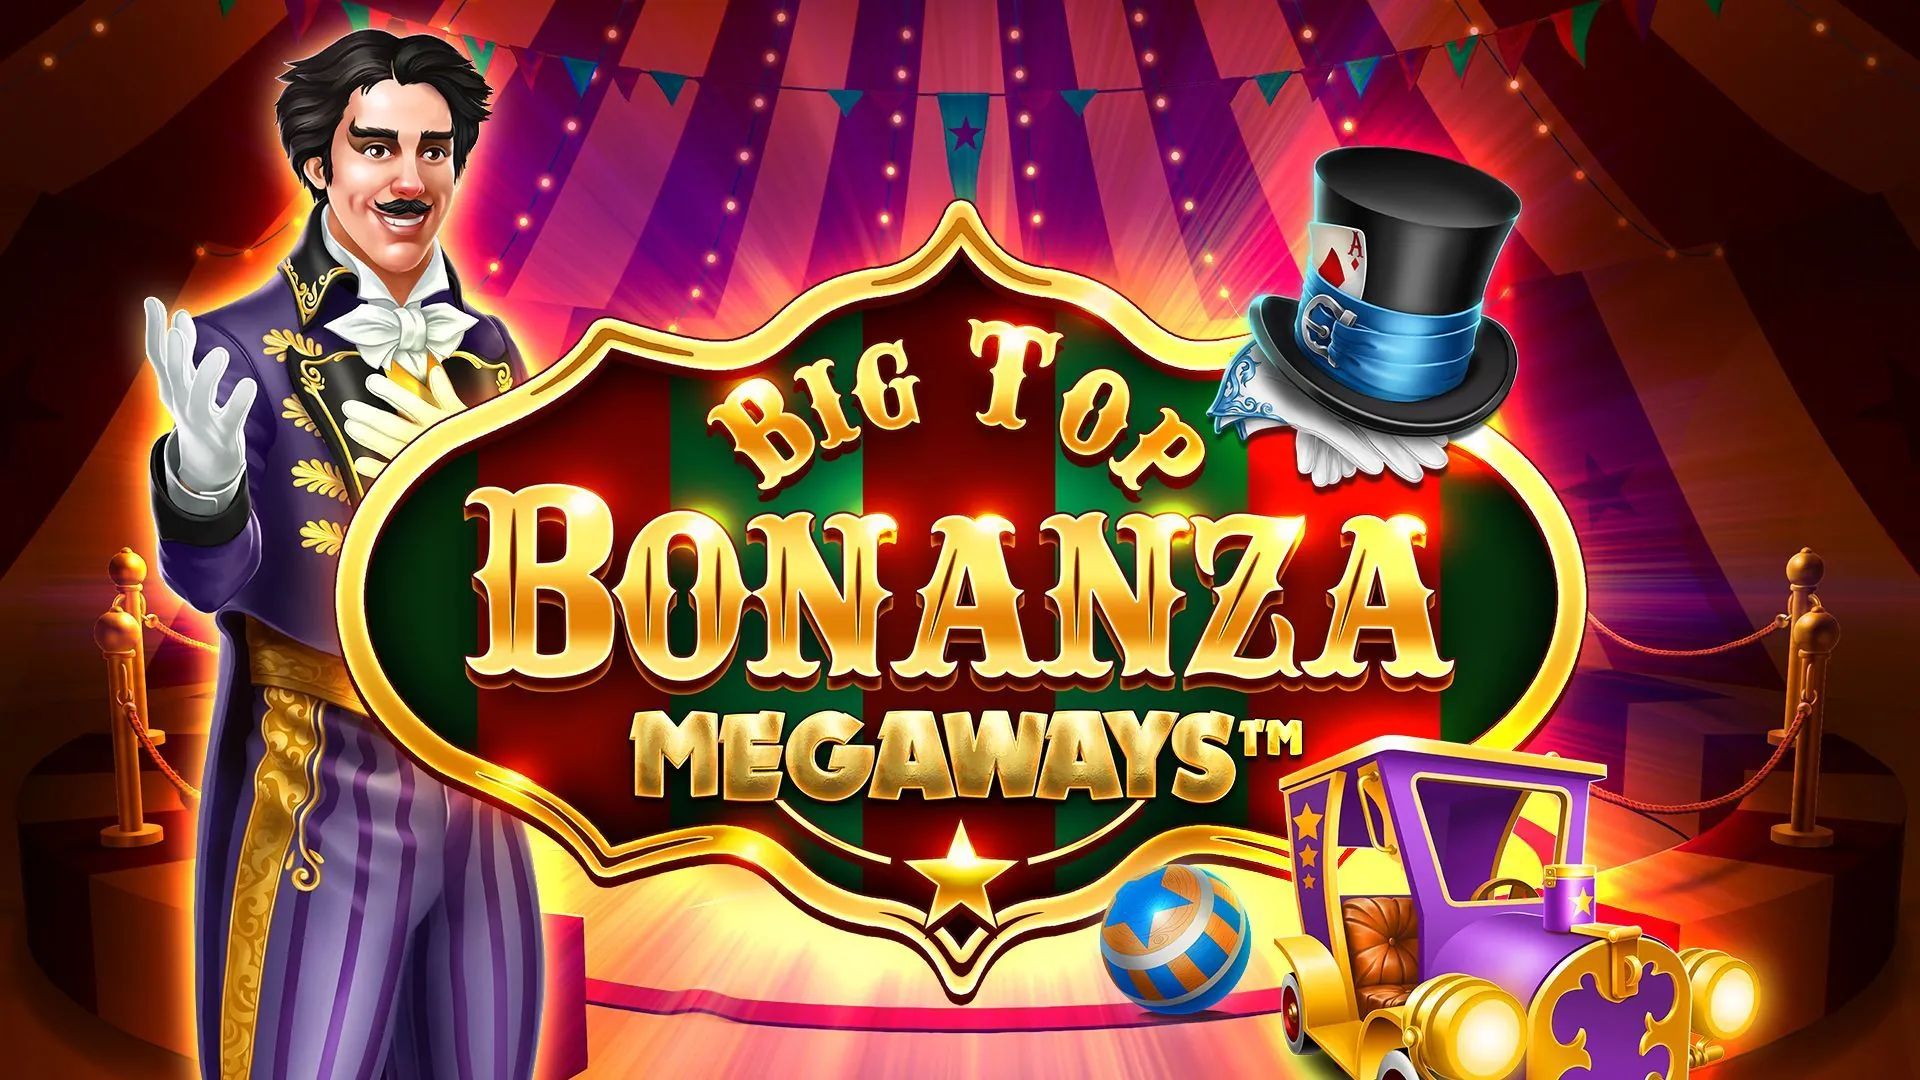 Our Big Top Bonanza Megaways is one of the most popular Megaways slots of 2022 as per Bigwinboard®